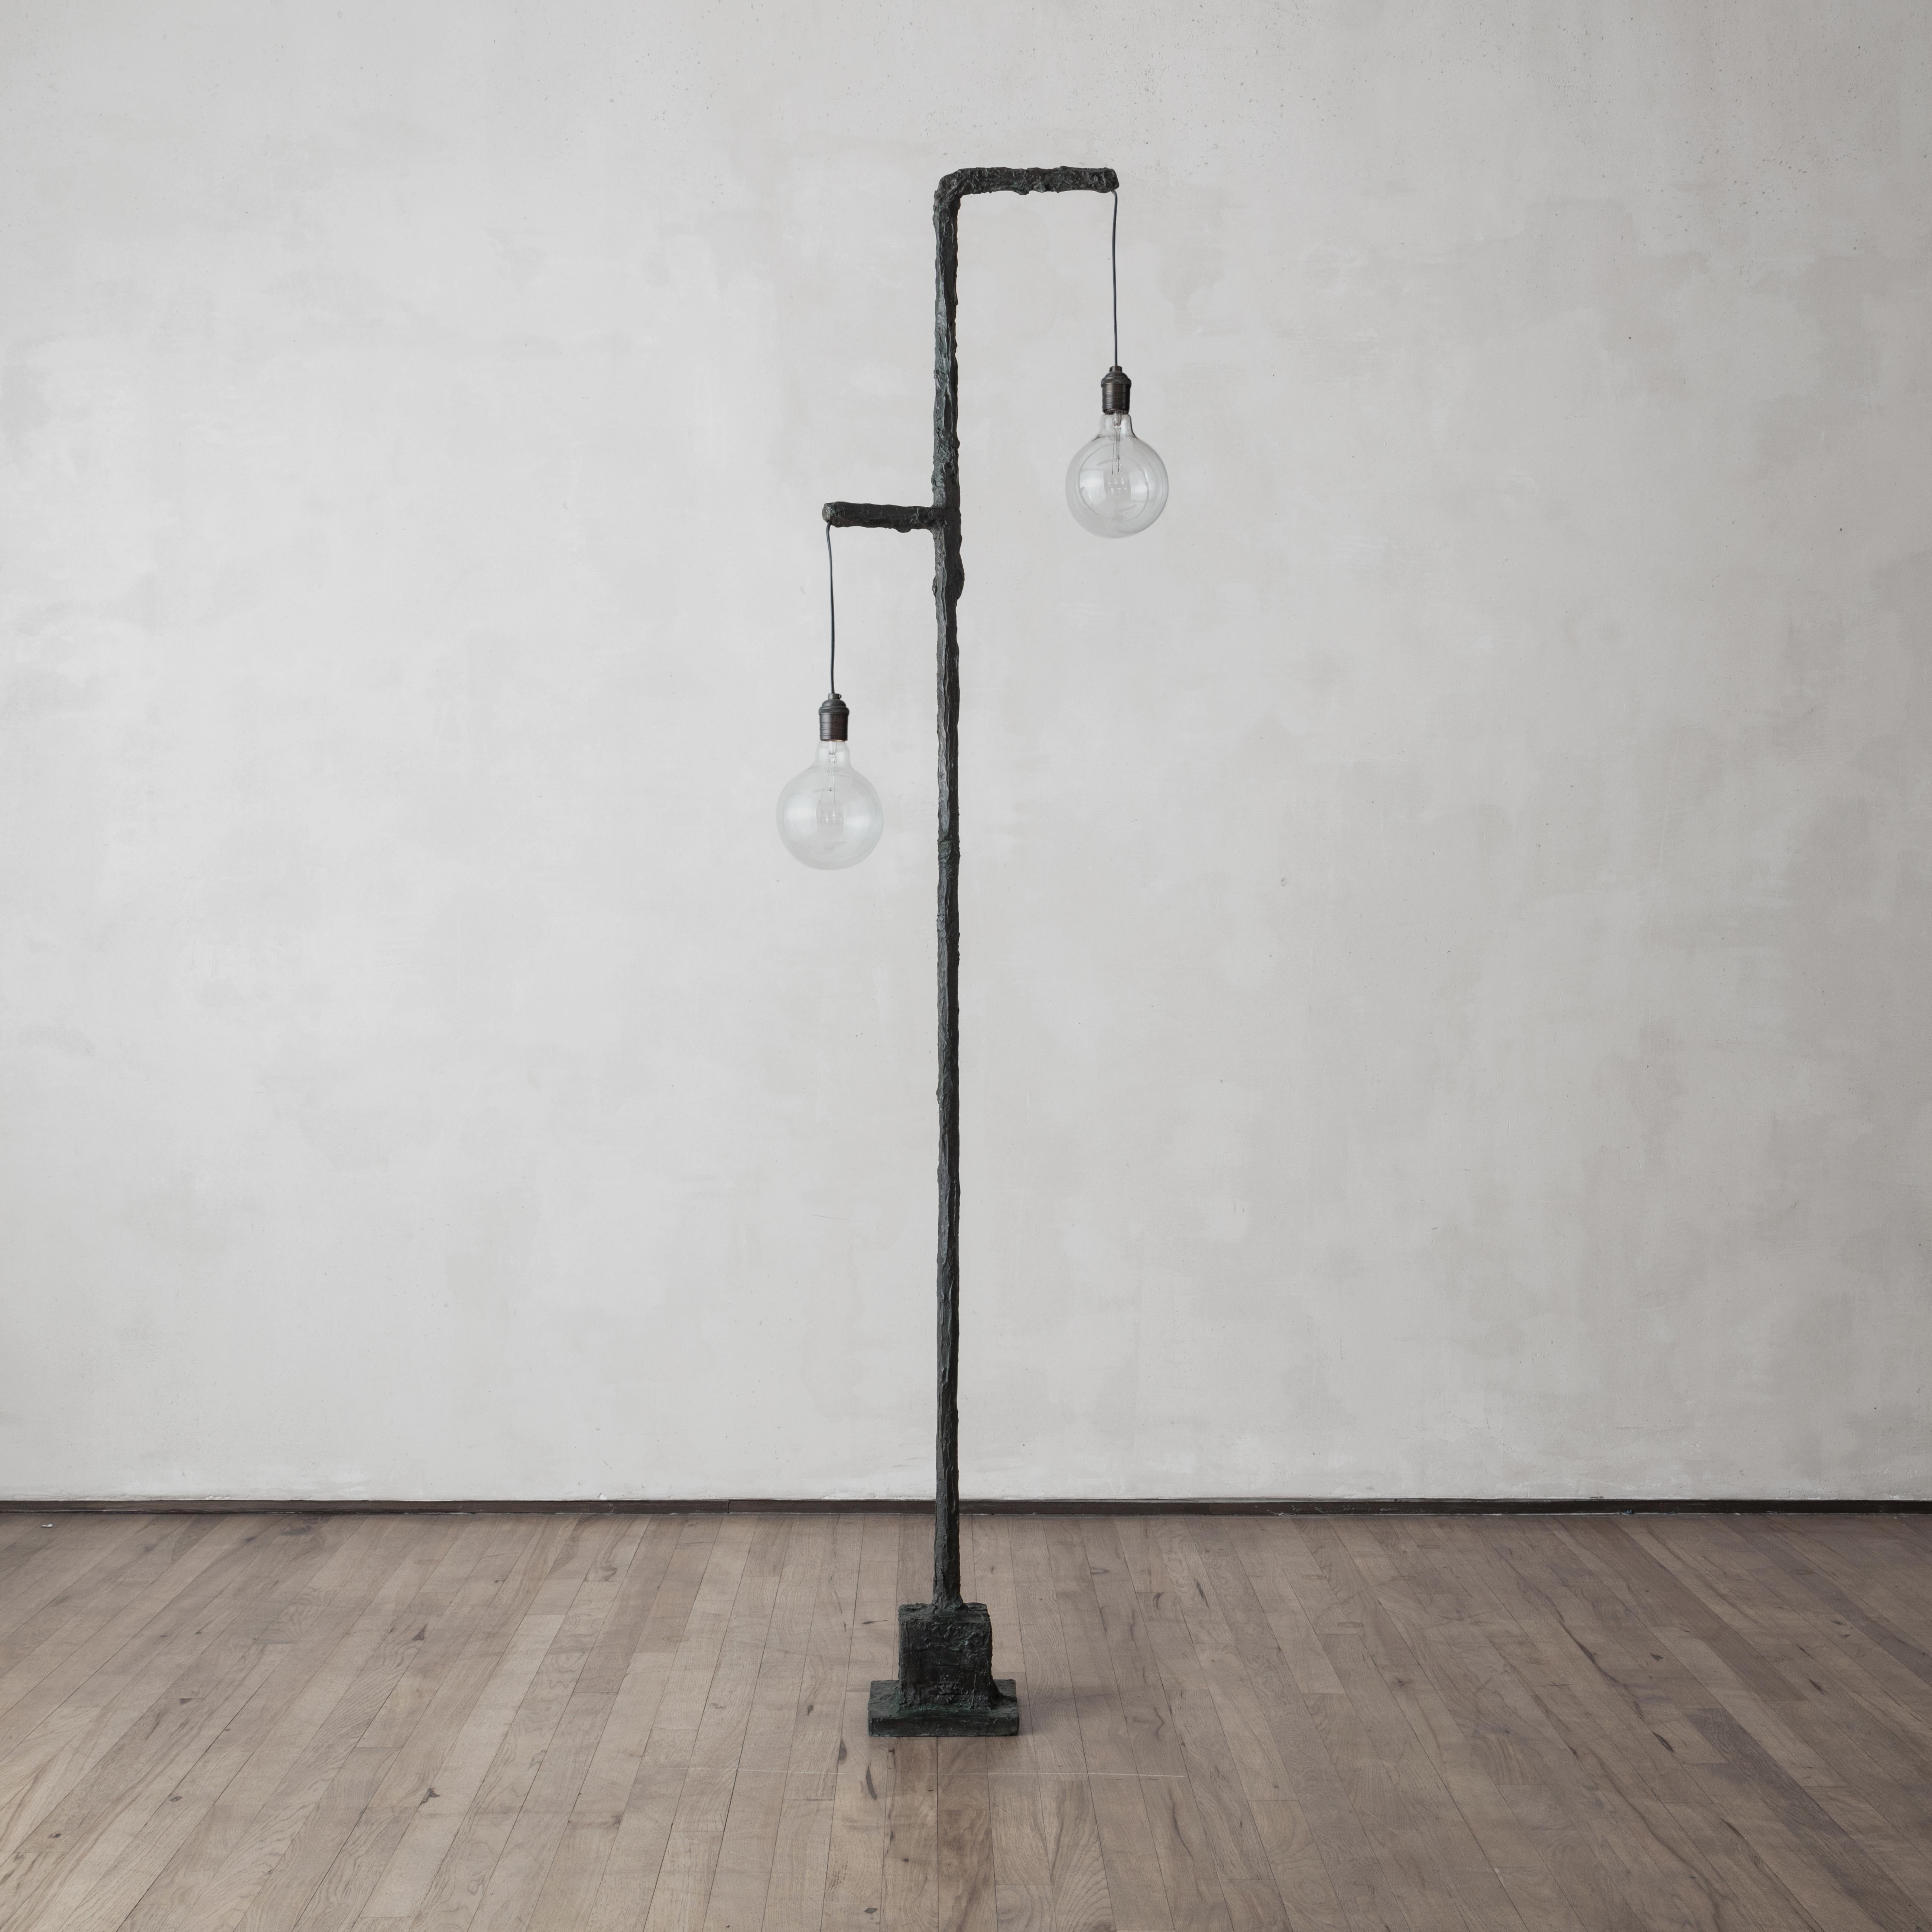 A sculptural floor lamp that finds its elegance in its simplicity. Casted in bronze, the lighting piece is a limited edition of 8 and 2 AP, is numbered and signed by the artist and casted to order in Paris.

Material: Cast bronze.